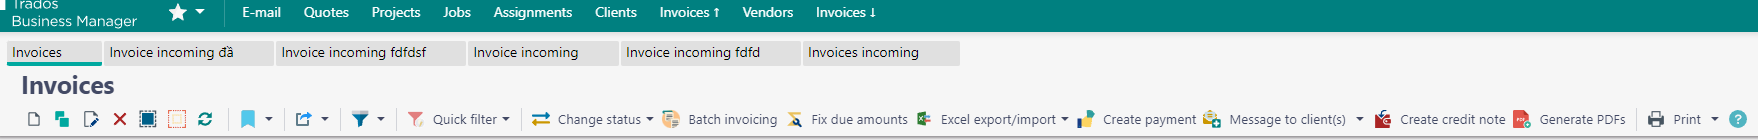 Trados Business Manager screenshot showing the Invoices tab with options for Quick filter, Change status, Batch invoicing, Fix due amounts, Excel exportimport, Create payment, Message to client(s), Create credit note, Generate PDFs, and Print.